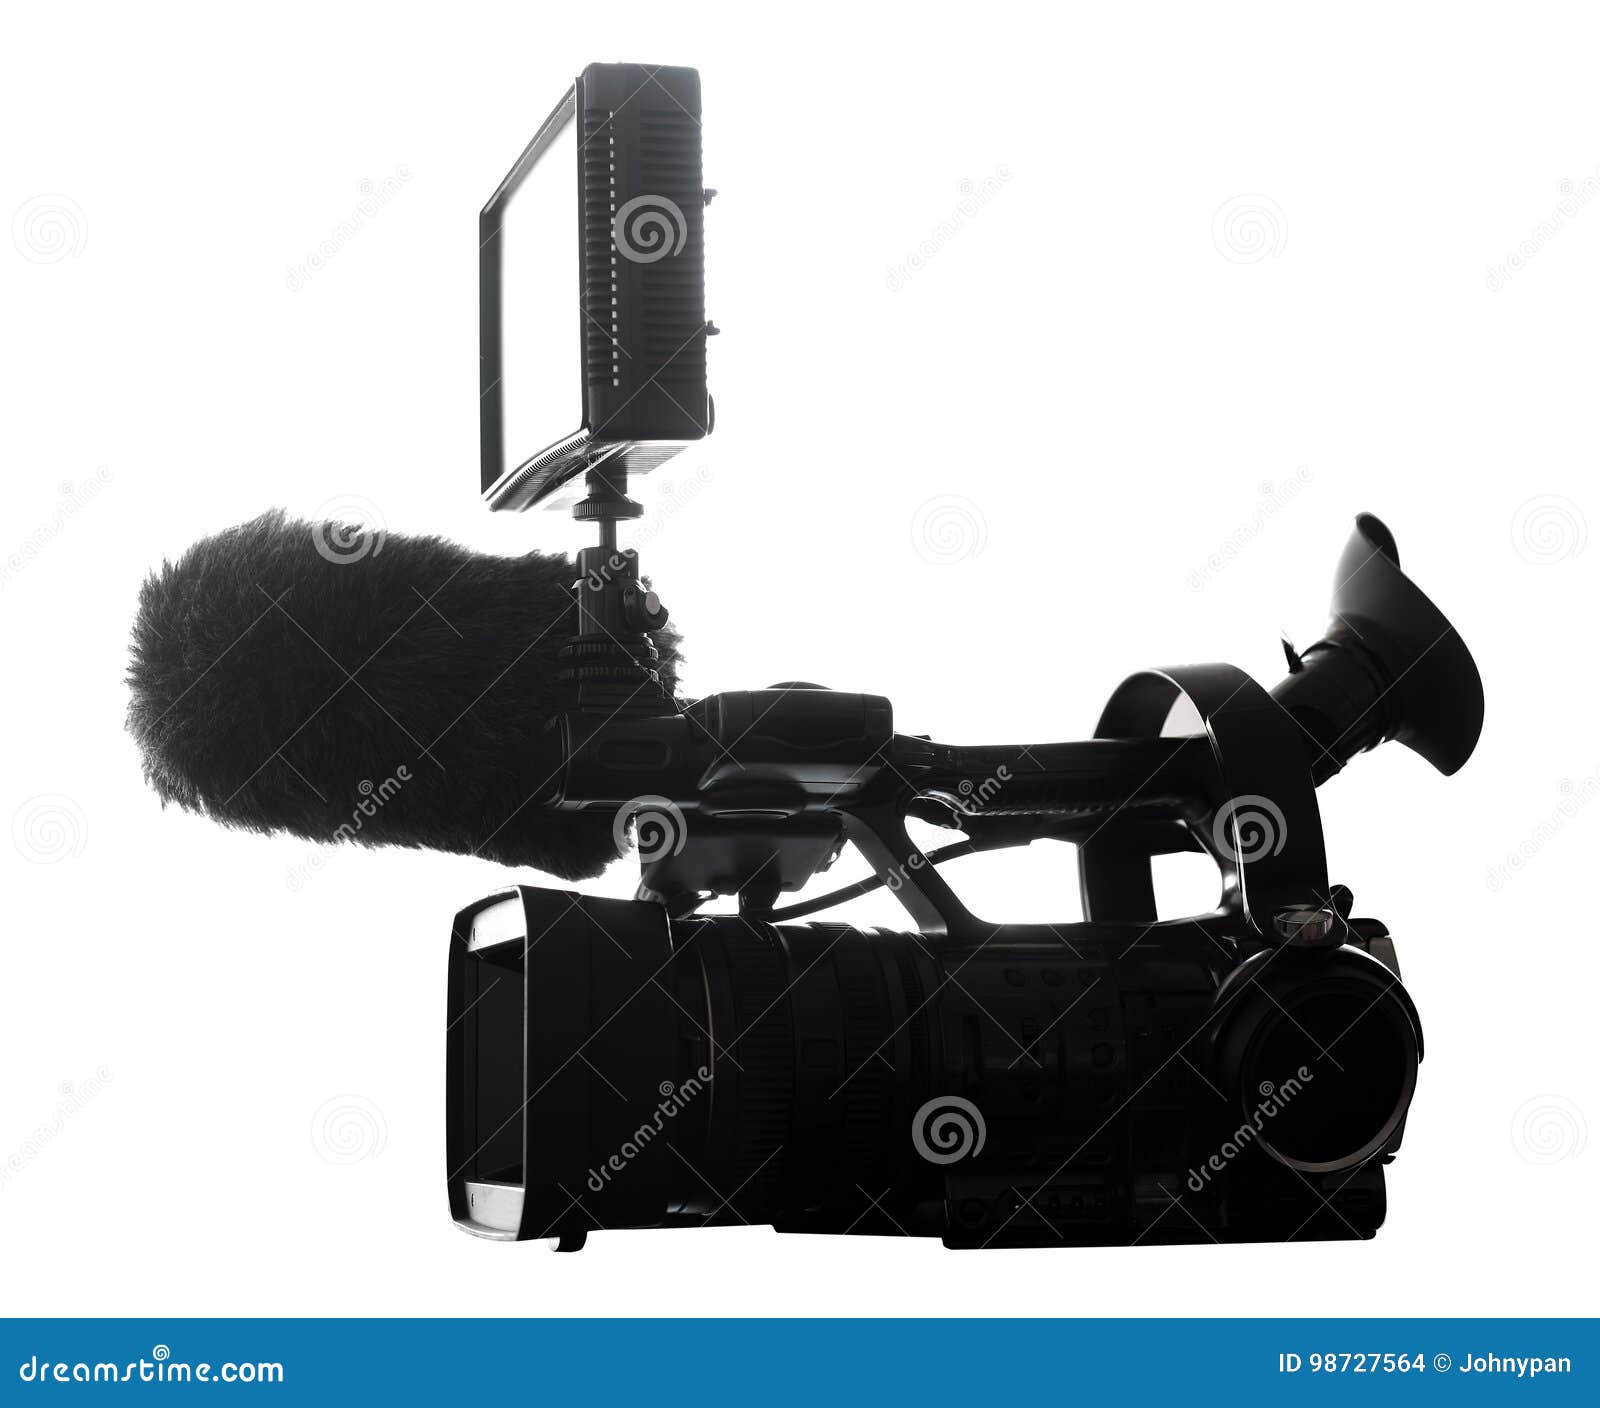 silhouette of a profesional video camera